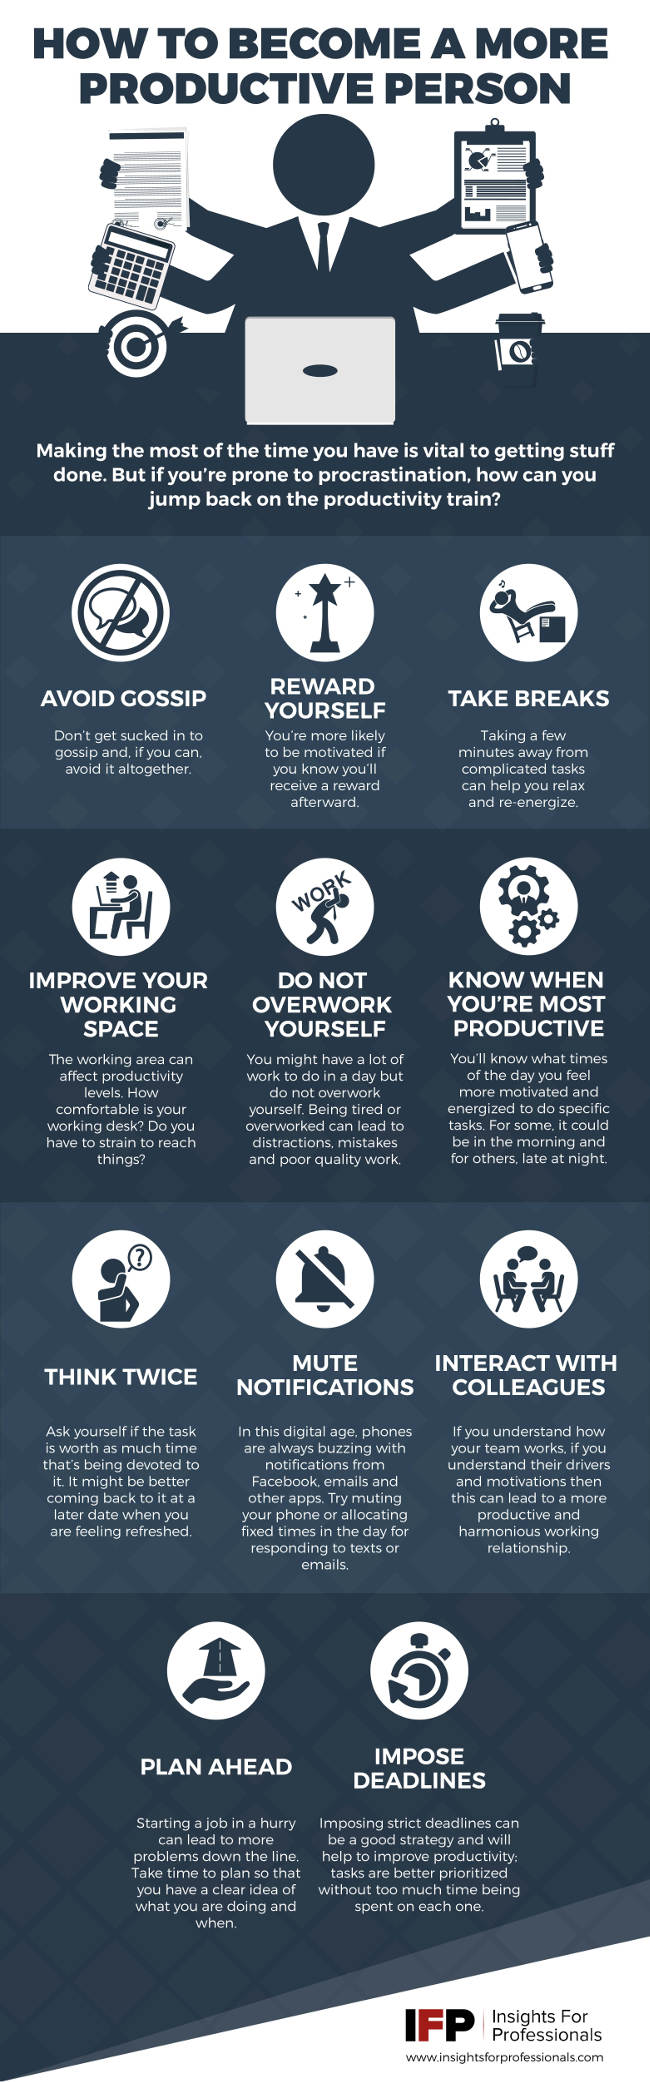 How to Become a More Productive Person [Infographic]